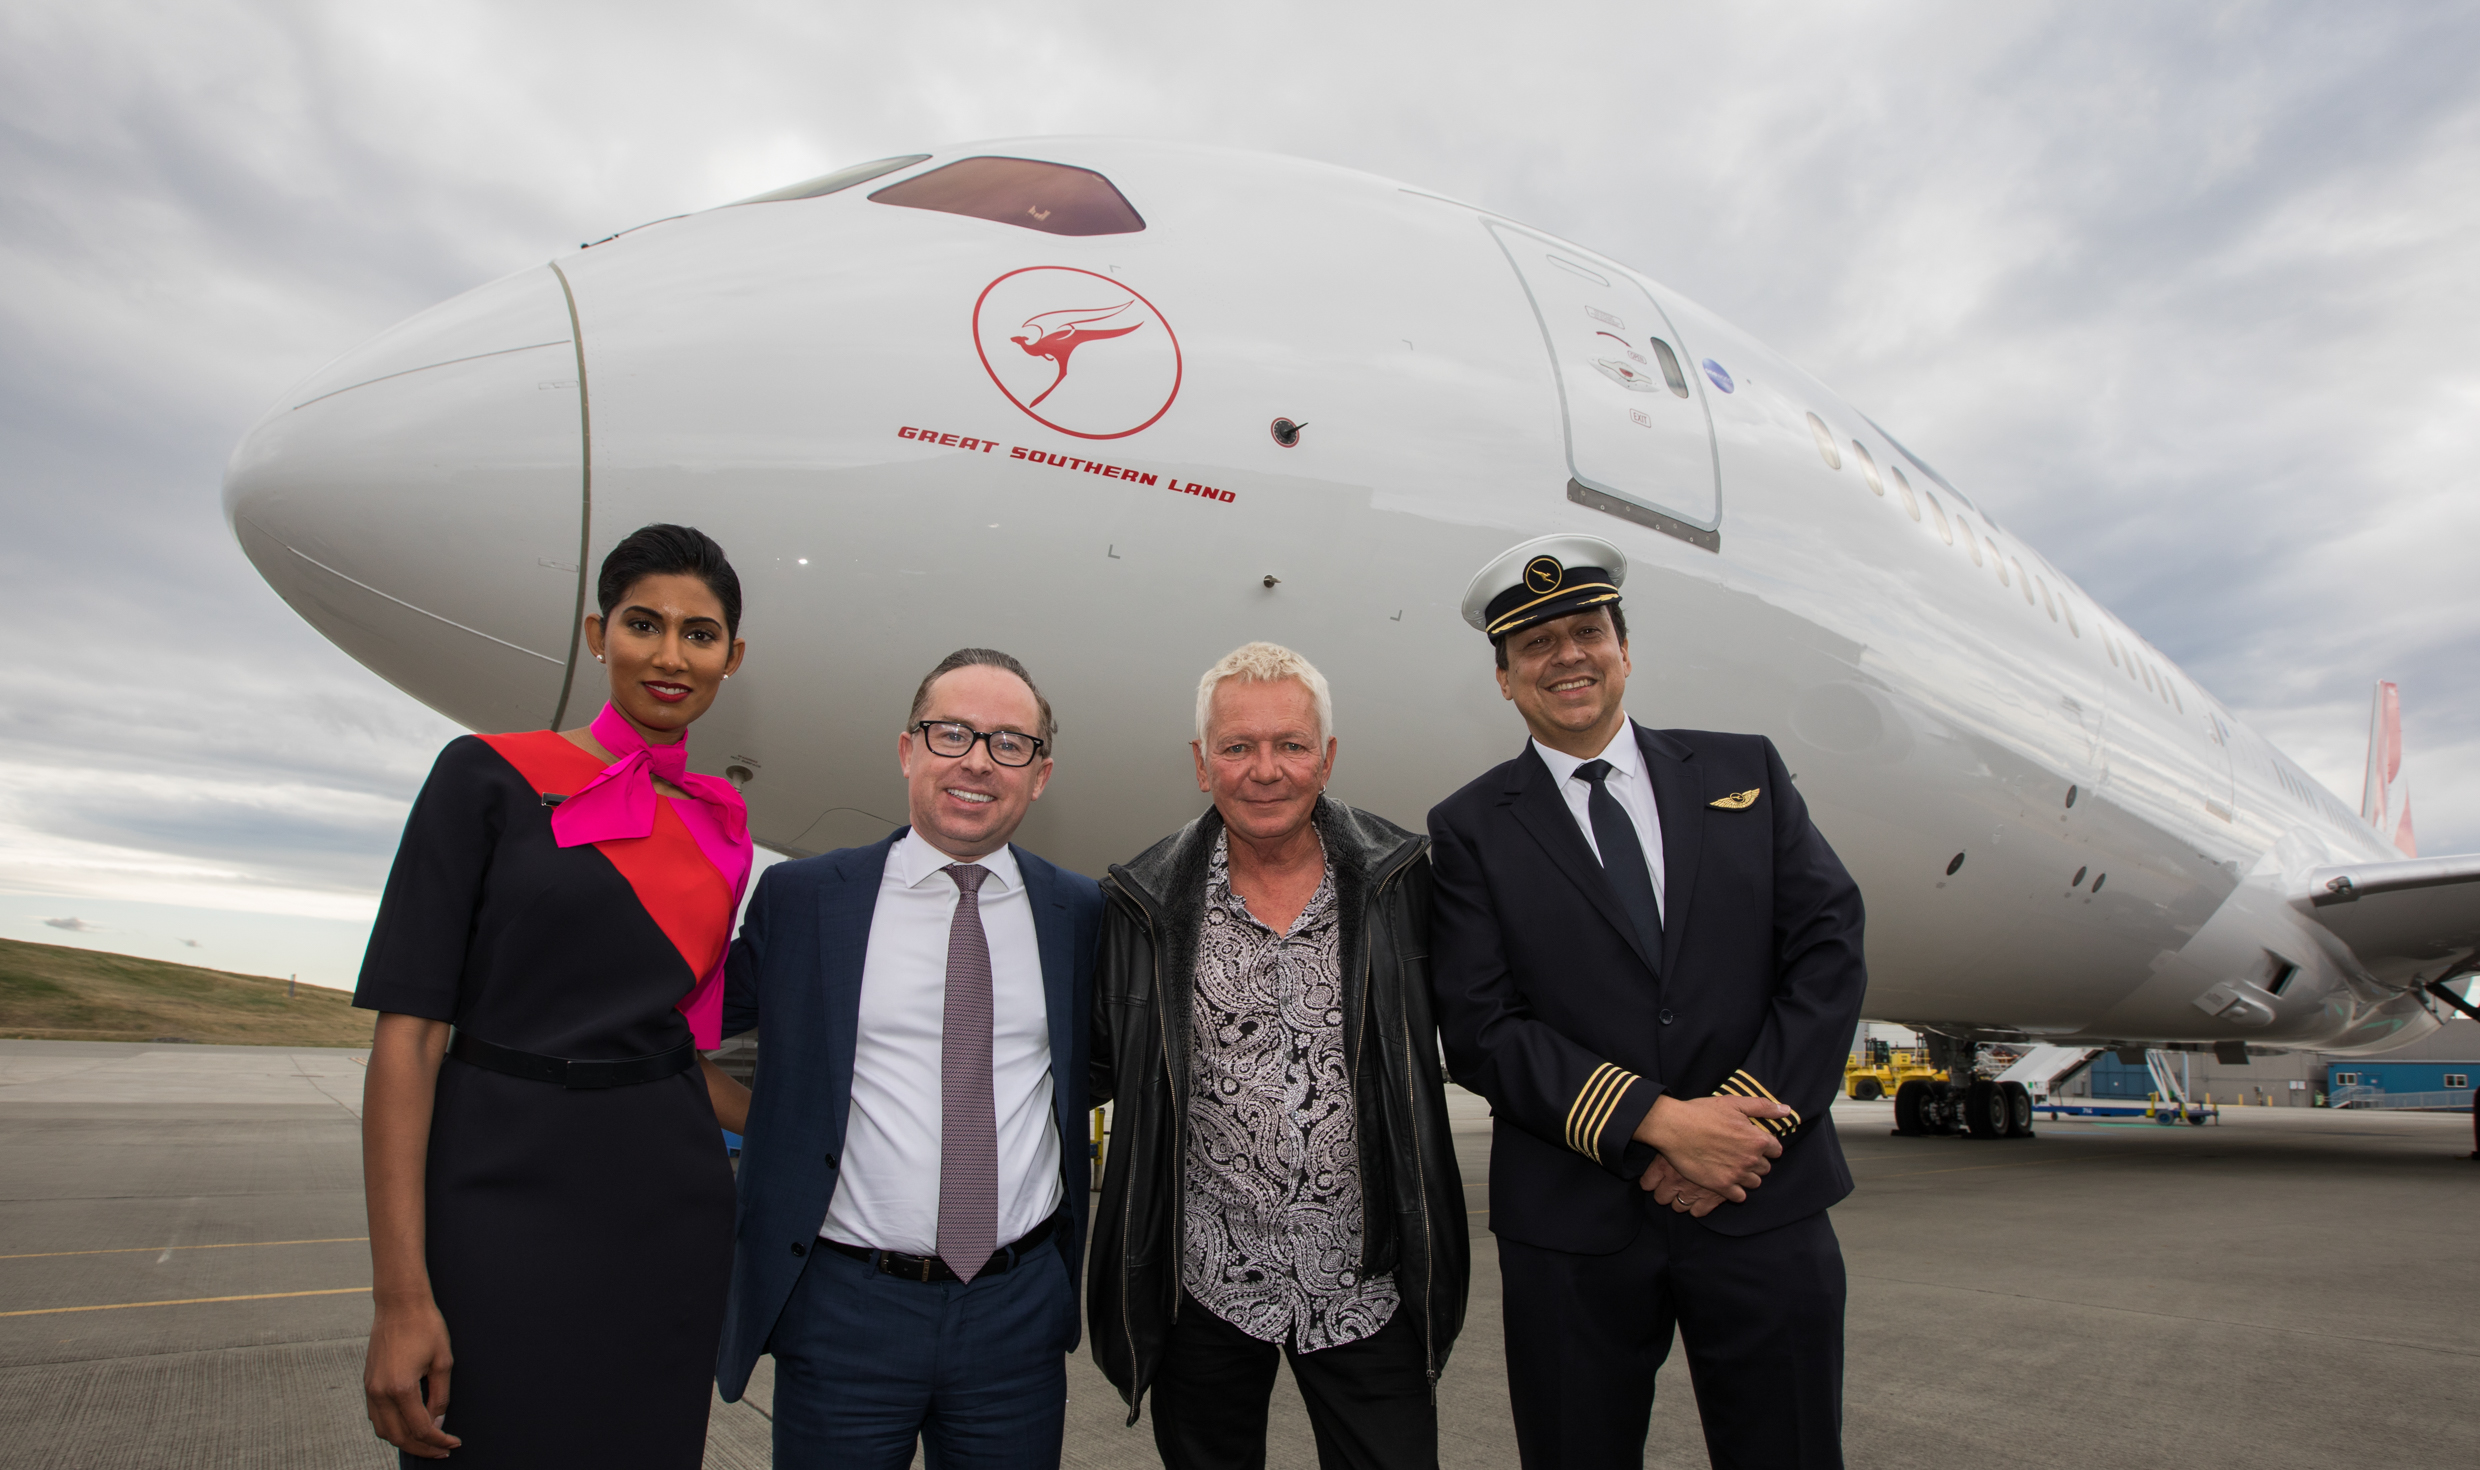 “It’s a special song for us”: Iva Davies speaks to TMN as Qantas unveils Great Southern Land plane